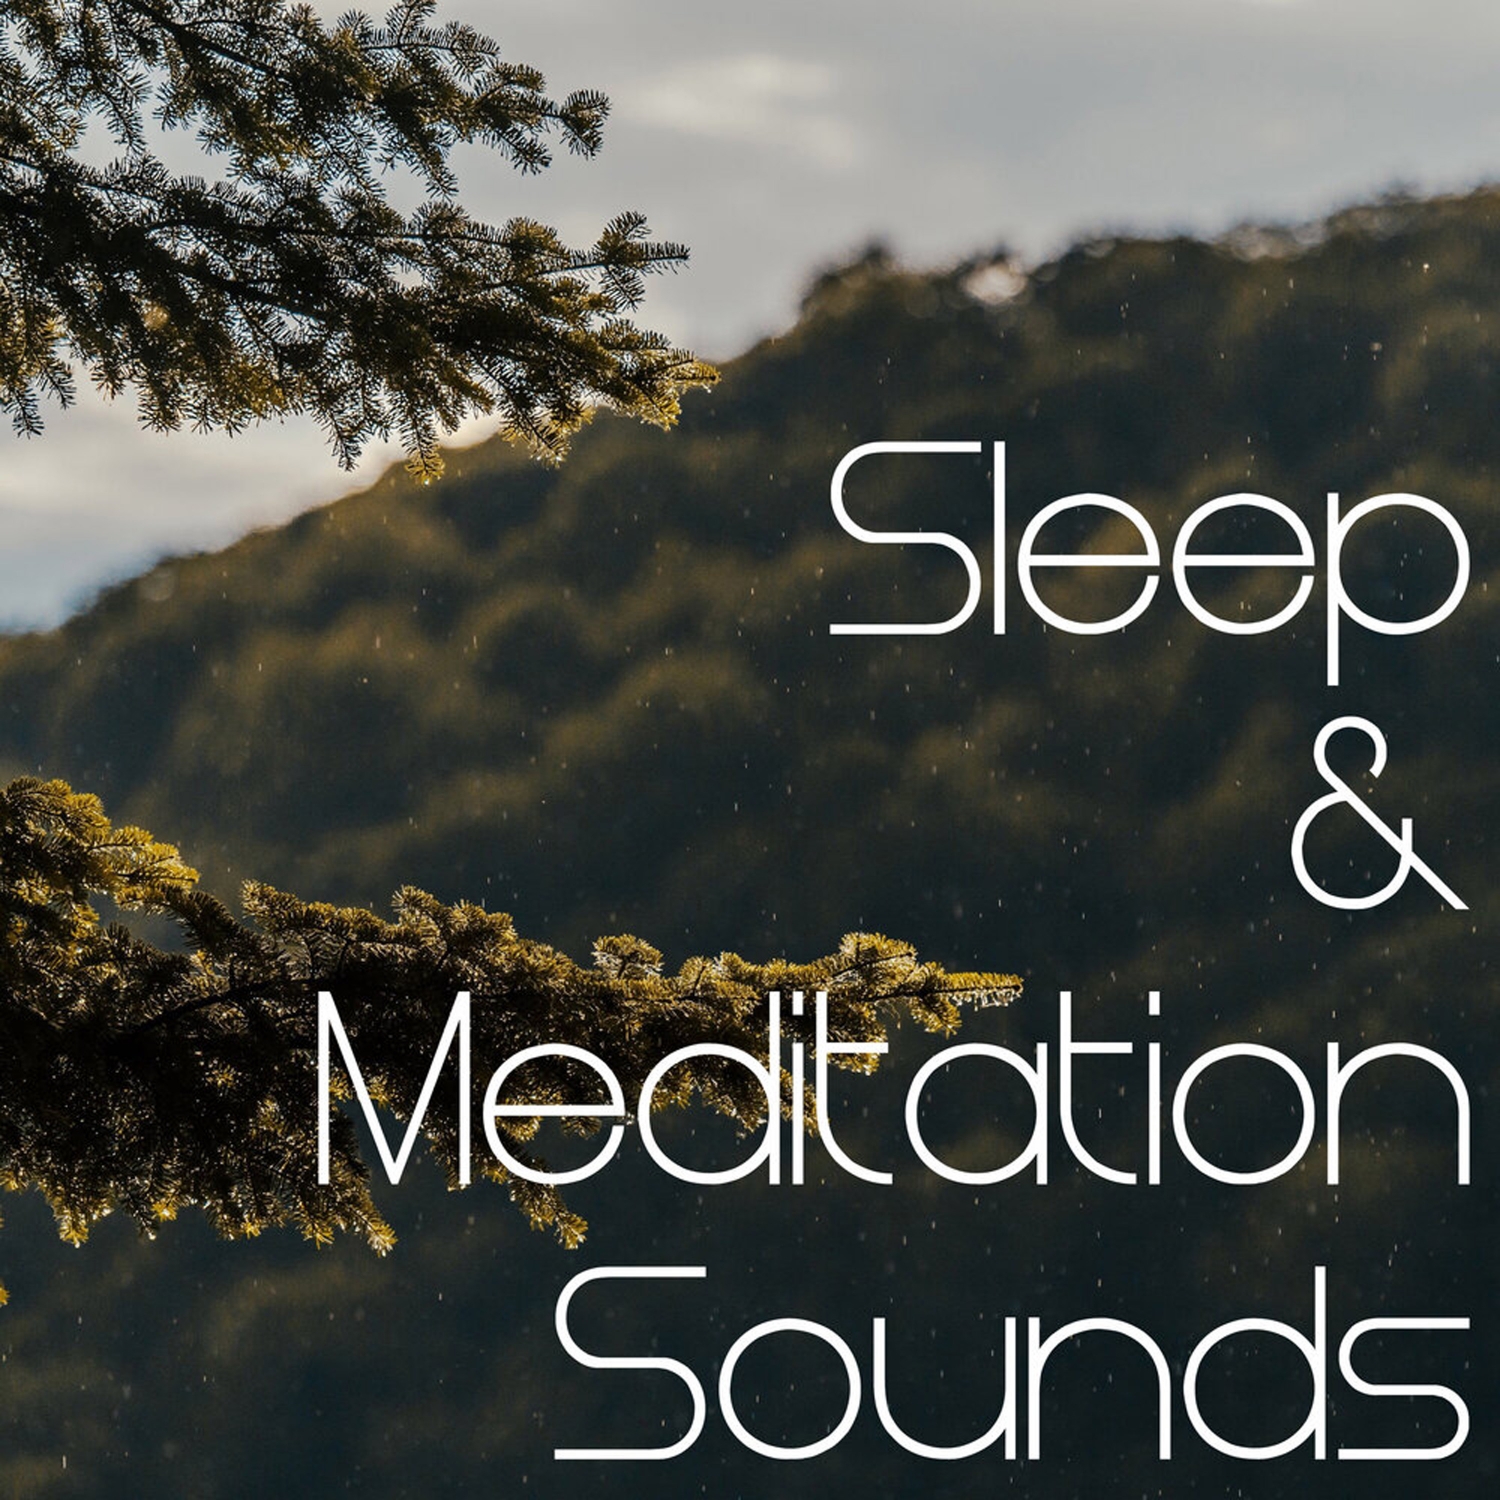 19 Rain and Nature Sounds Perfect for Looping for Sleep or Meditation